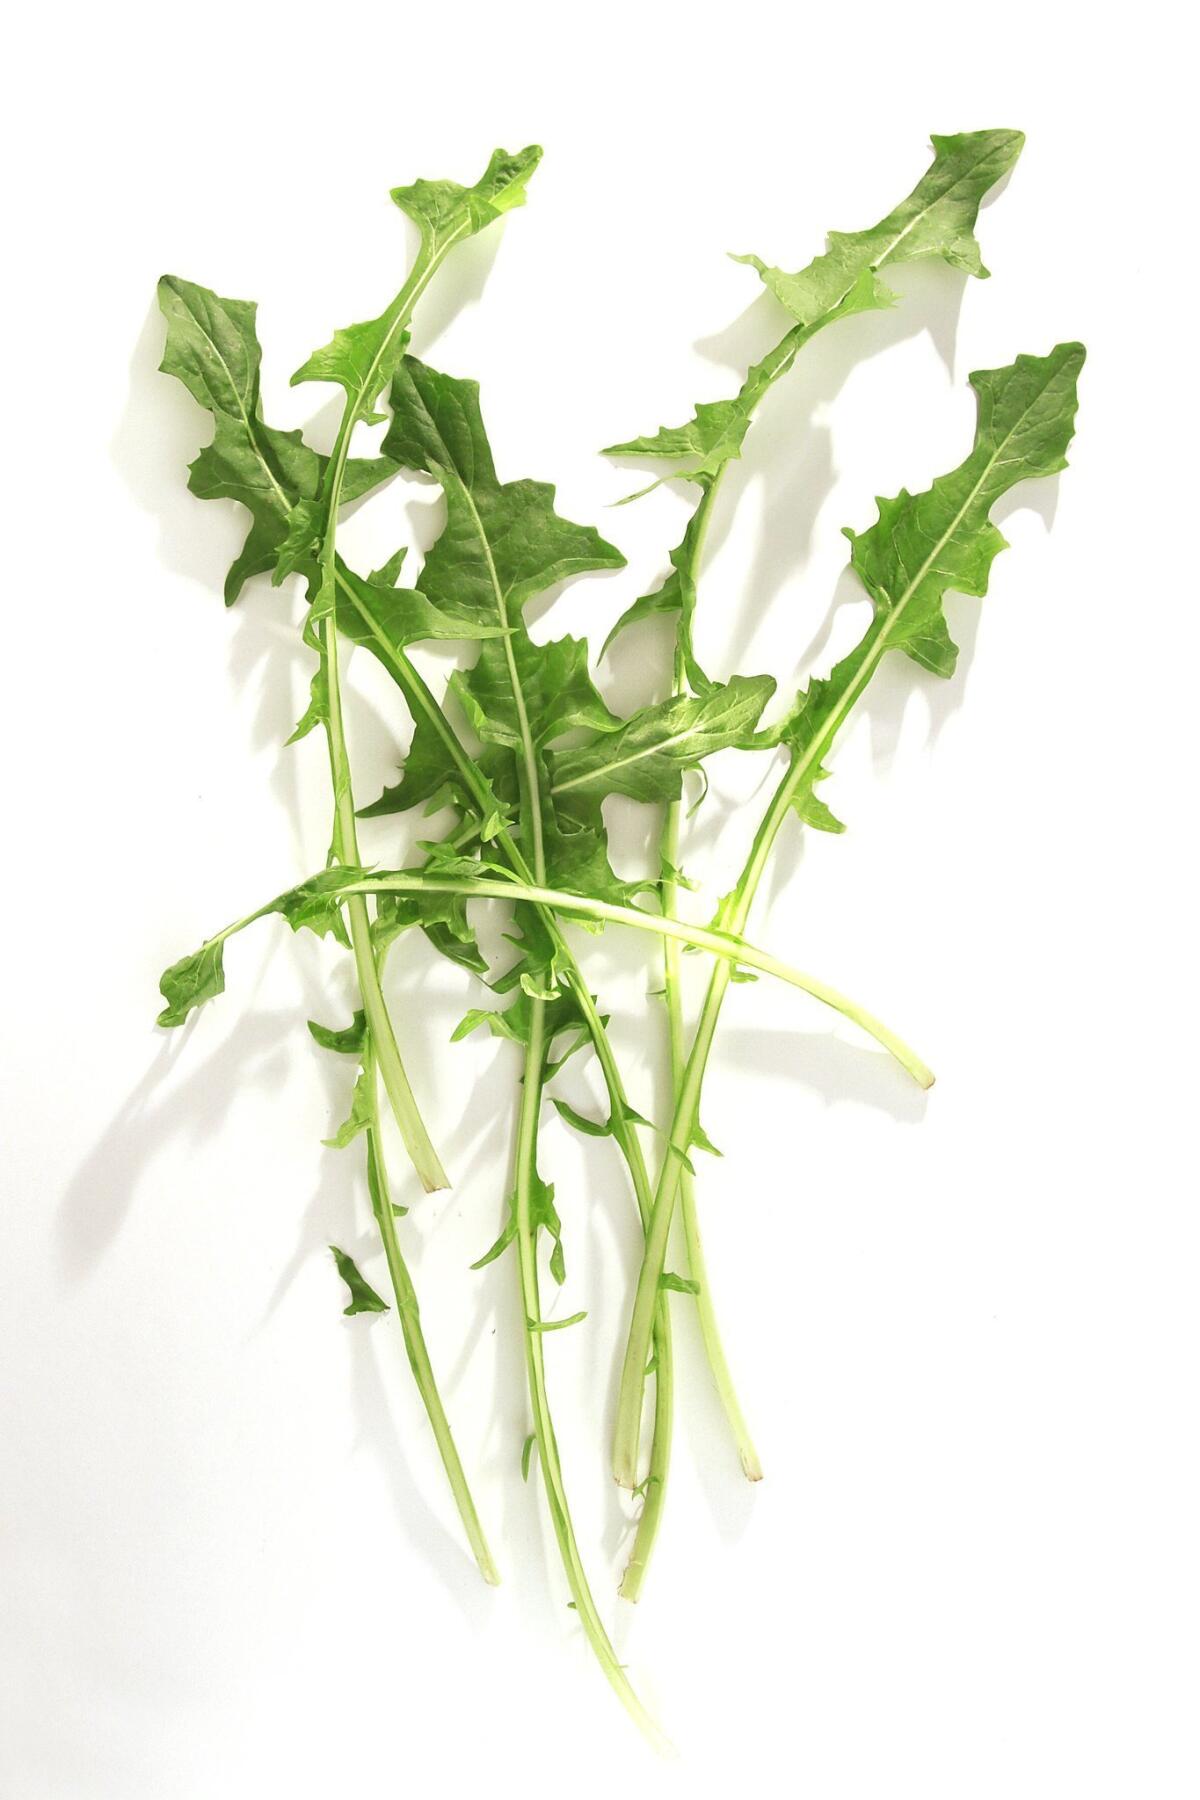 Fresh dandelion greens are a rich green-vegetable source of beta-carotene, and are high in calcium, iron and antioxidants.